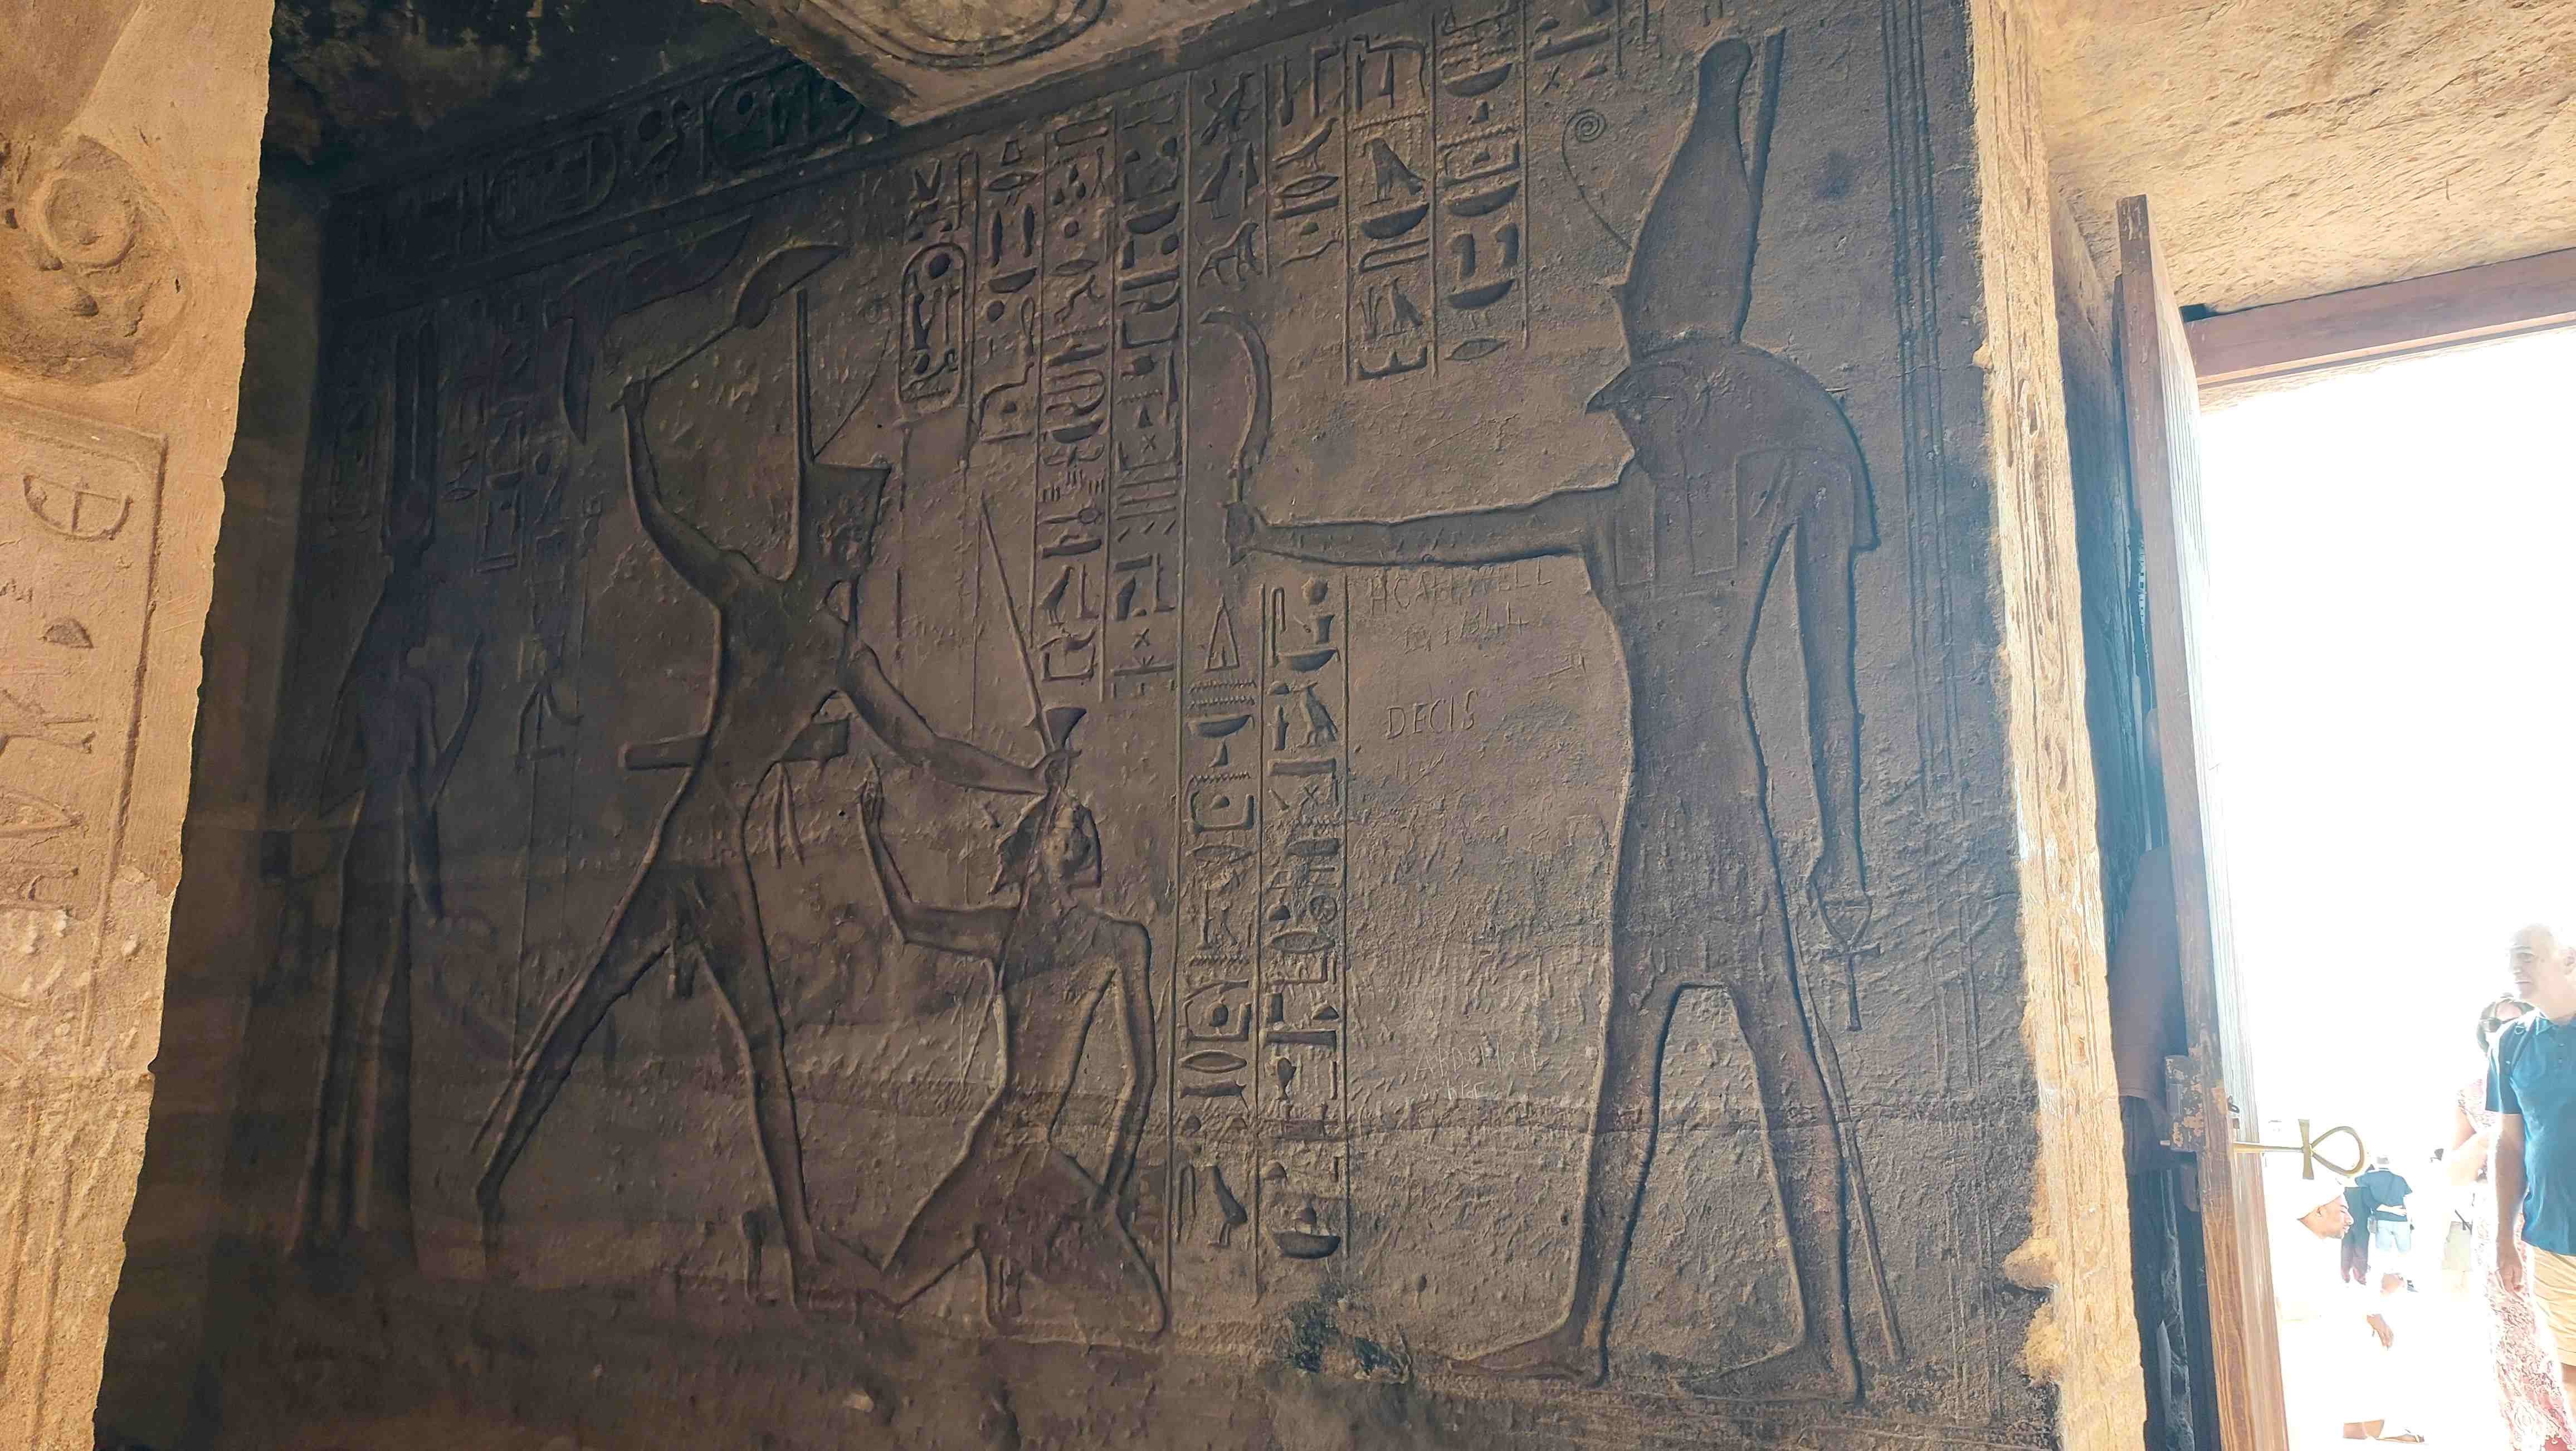 Hieroglyphics inside Nefertari's Temple showing Ramses II in battle with gods Horus and Hathor by his side